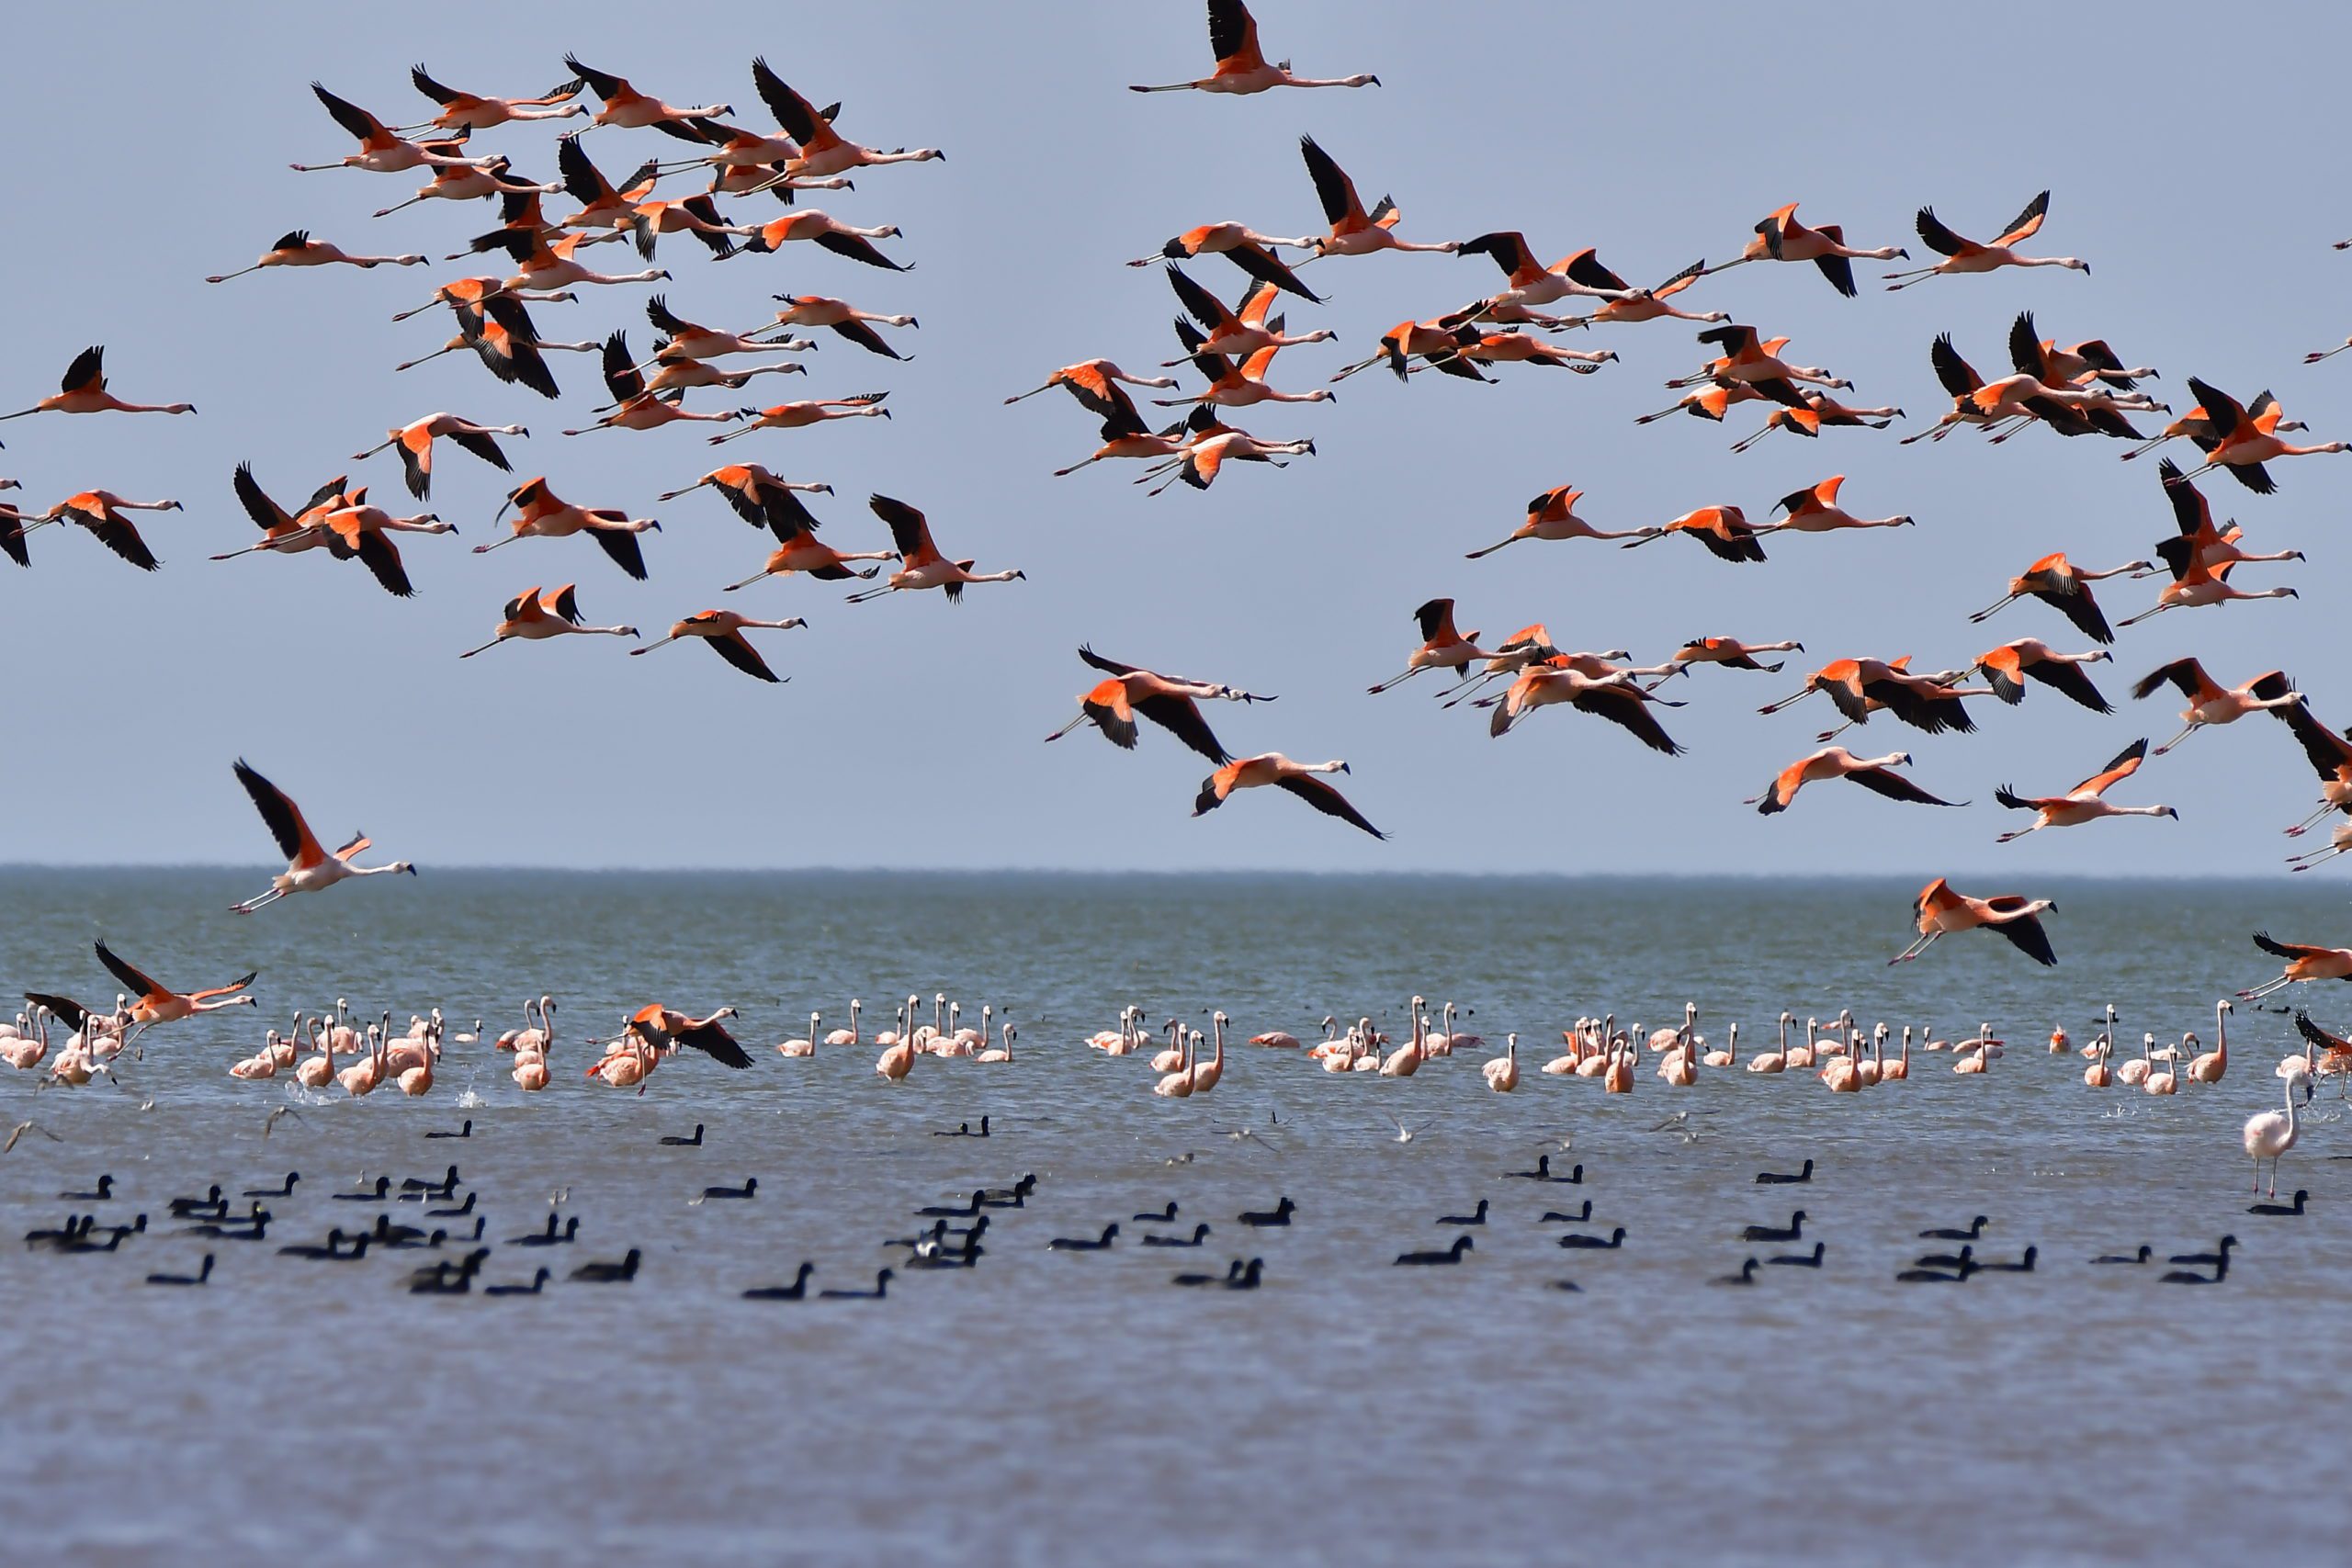 a flamboyance of flamingos takes flight while other flamingos stand in the distance amidst a blue. lake with a flock of dark birds floating in the foreground